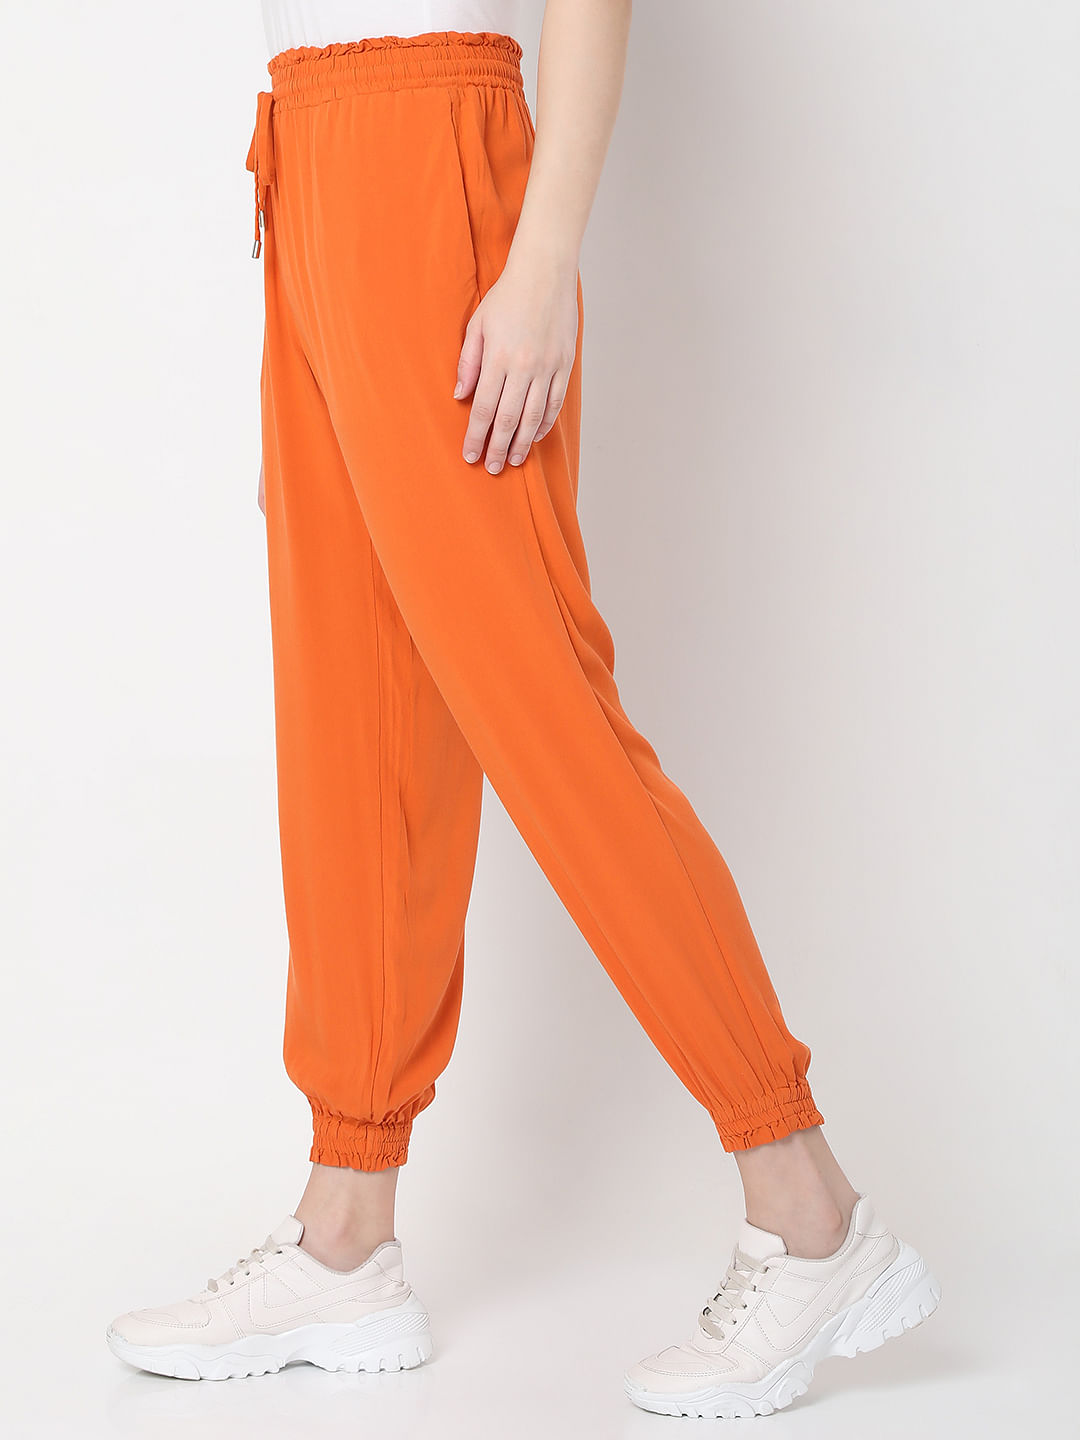 Buy Orange Trousers  Pants for Women by The Dry State Online  Ajiocom